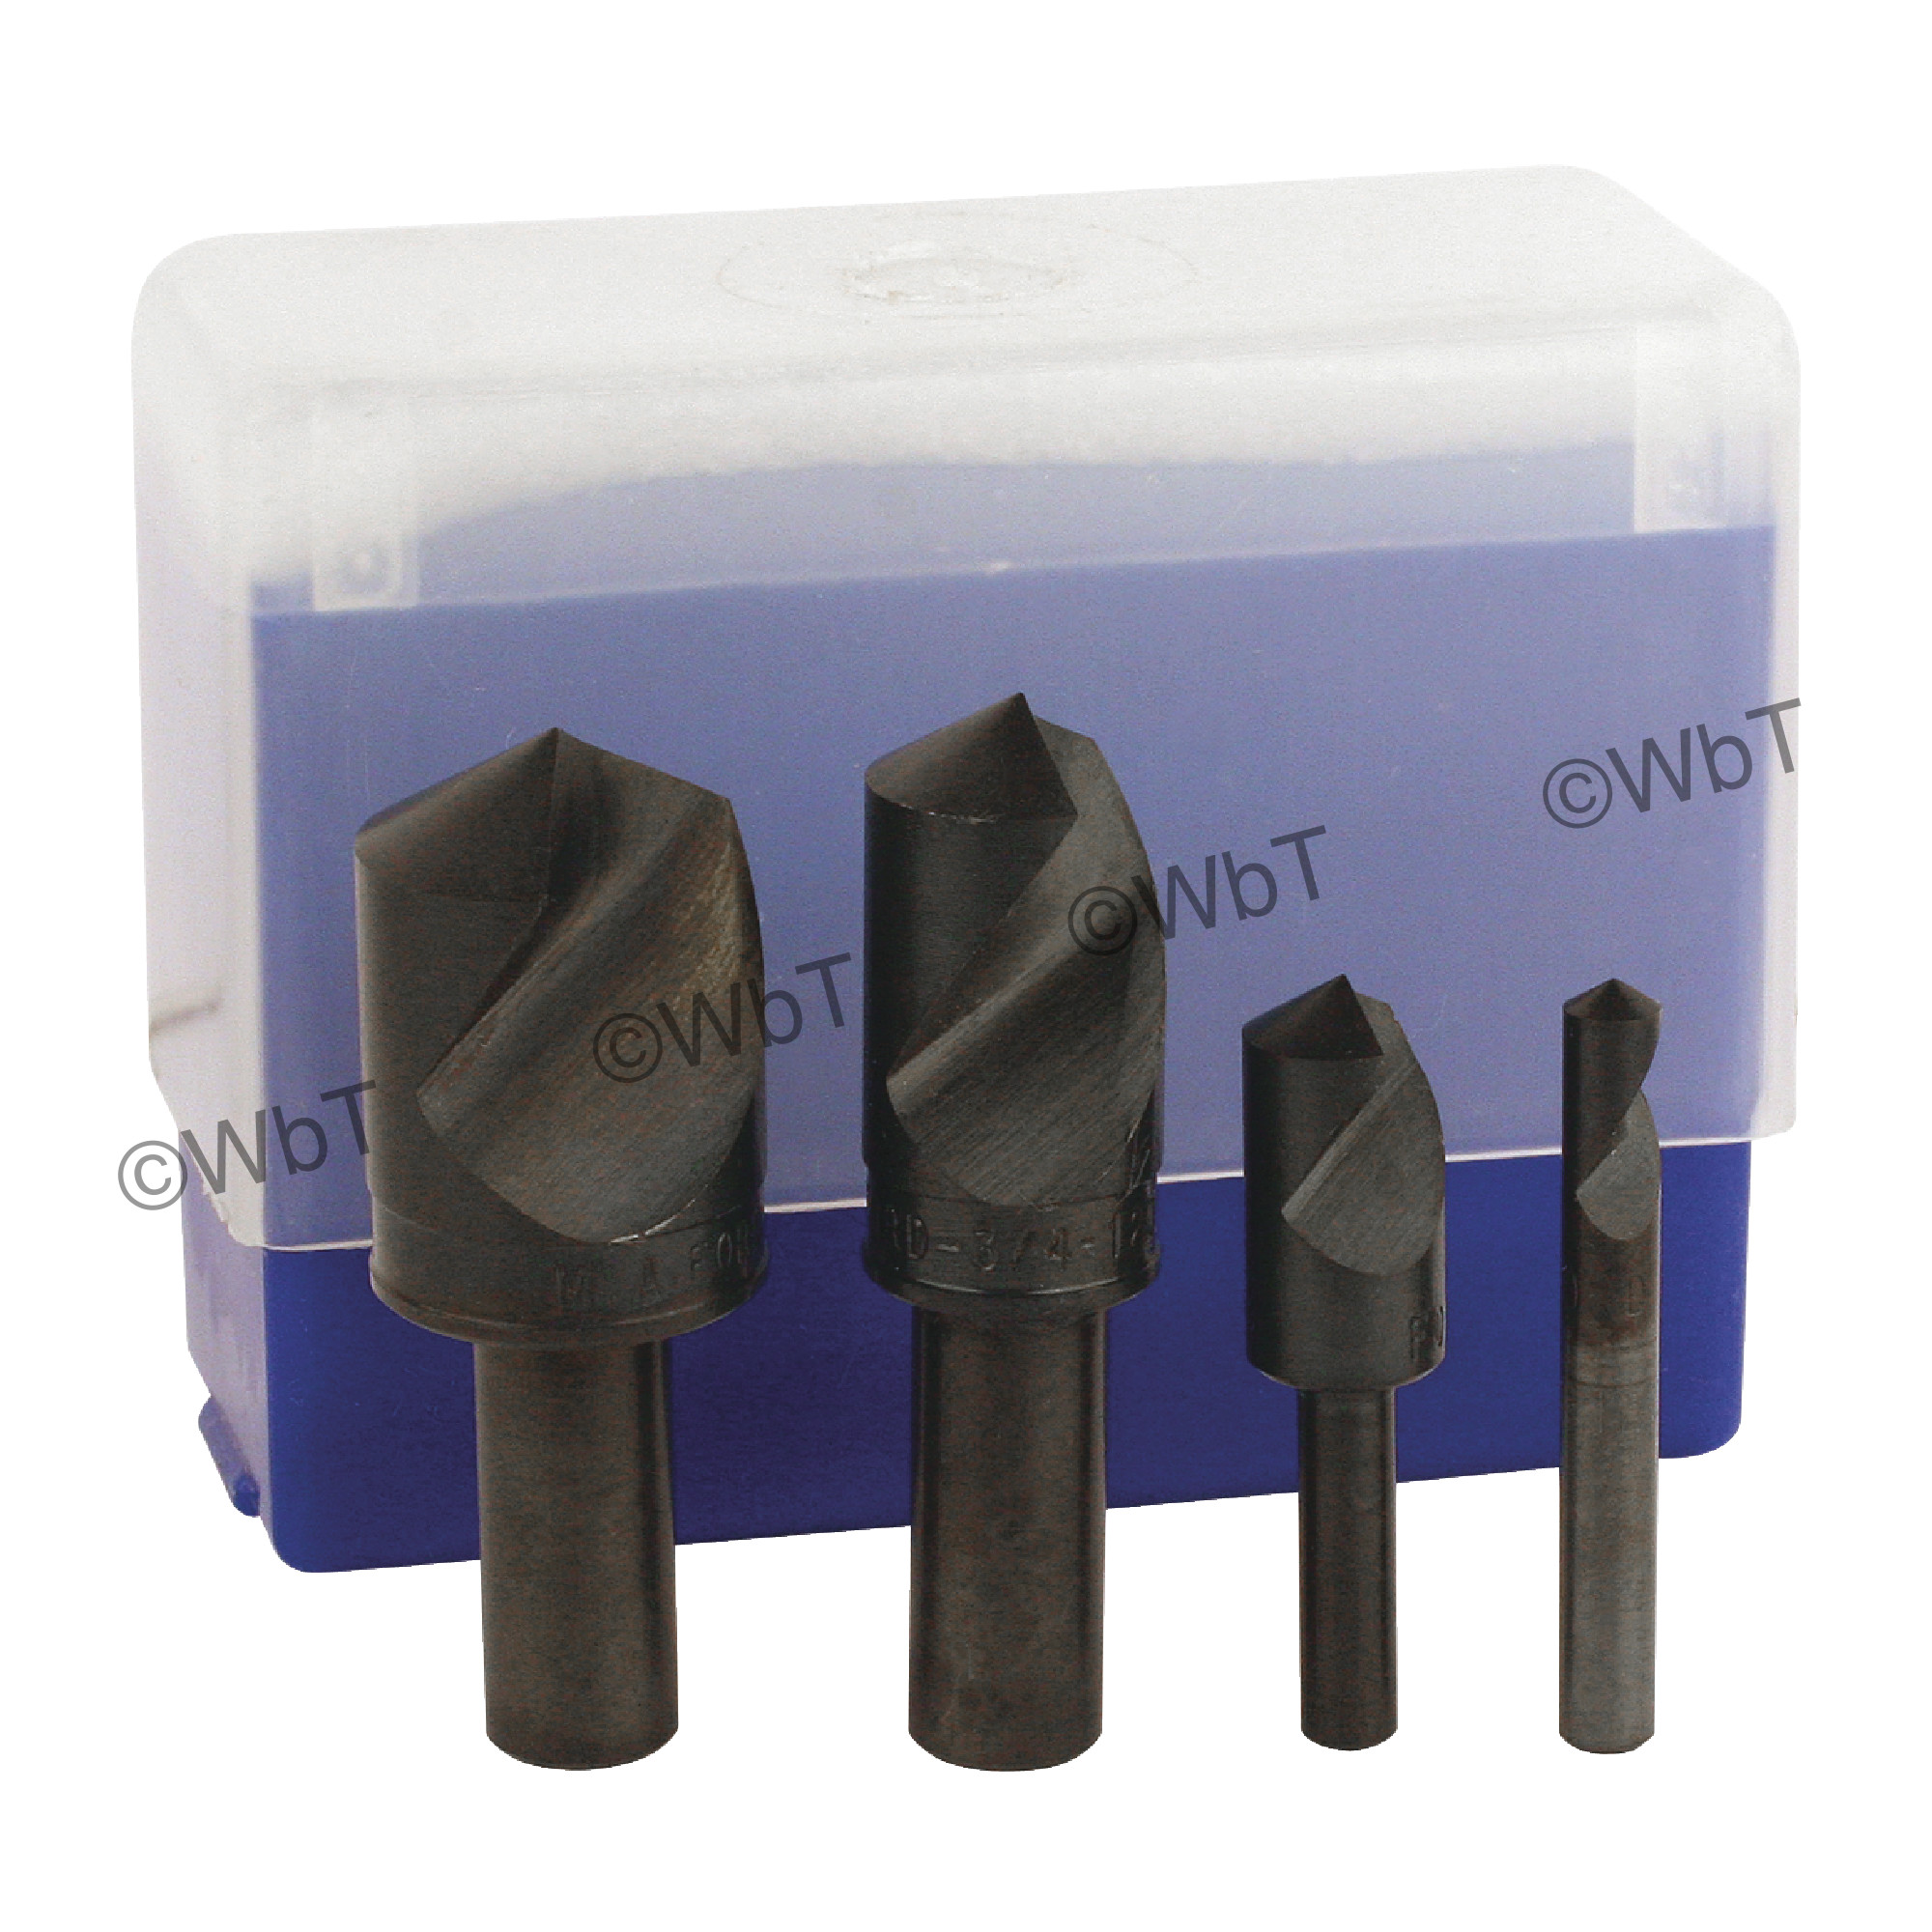 M.A. FORD 1 Flute 4 Piece 1/4" to 1" High Speed Steel 100&#176; Included Angle Countersink Set